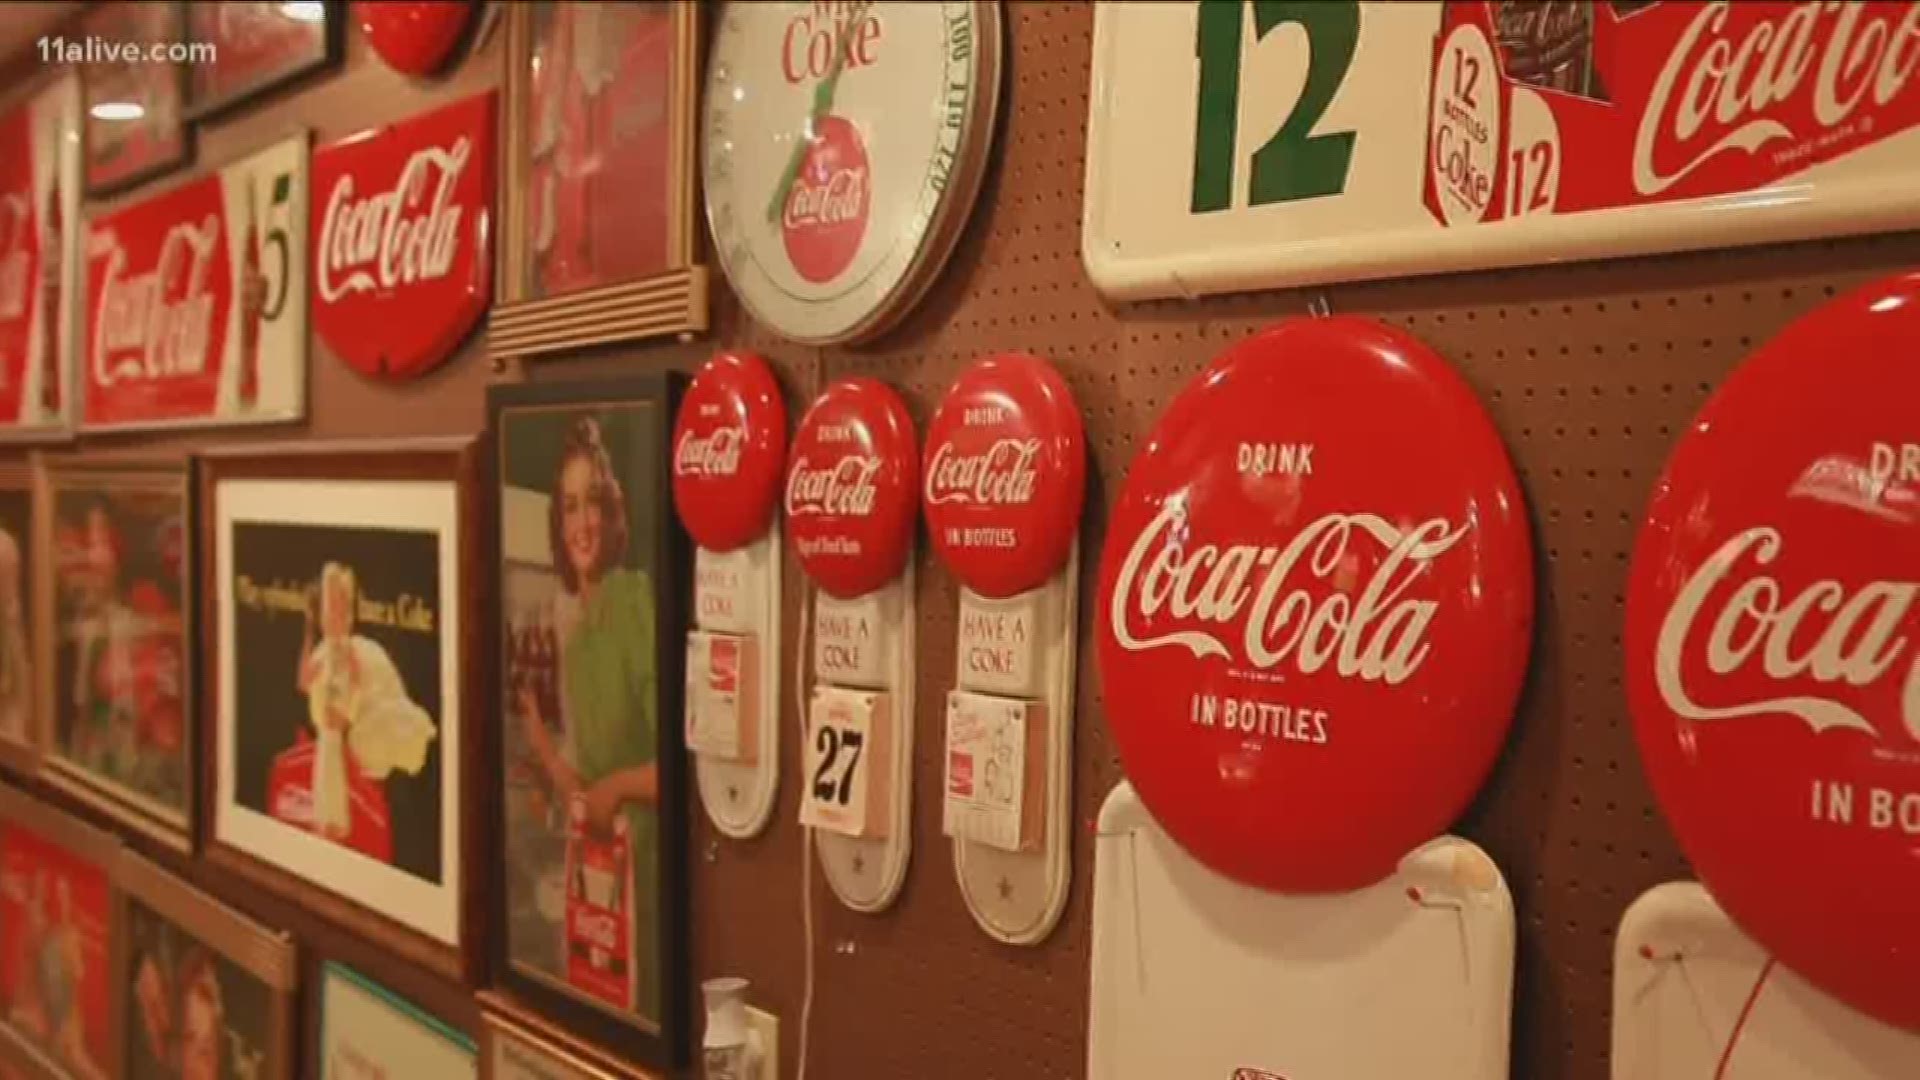 Cheers to a collection like no other! North Georgia resident Oscar Segovia has dedicated his life to collecting all things Coca-Cola.